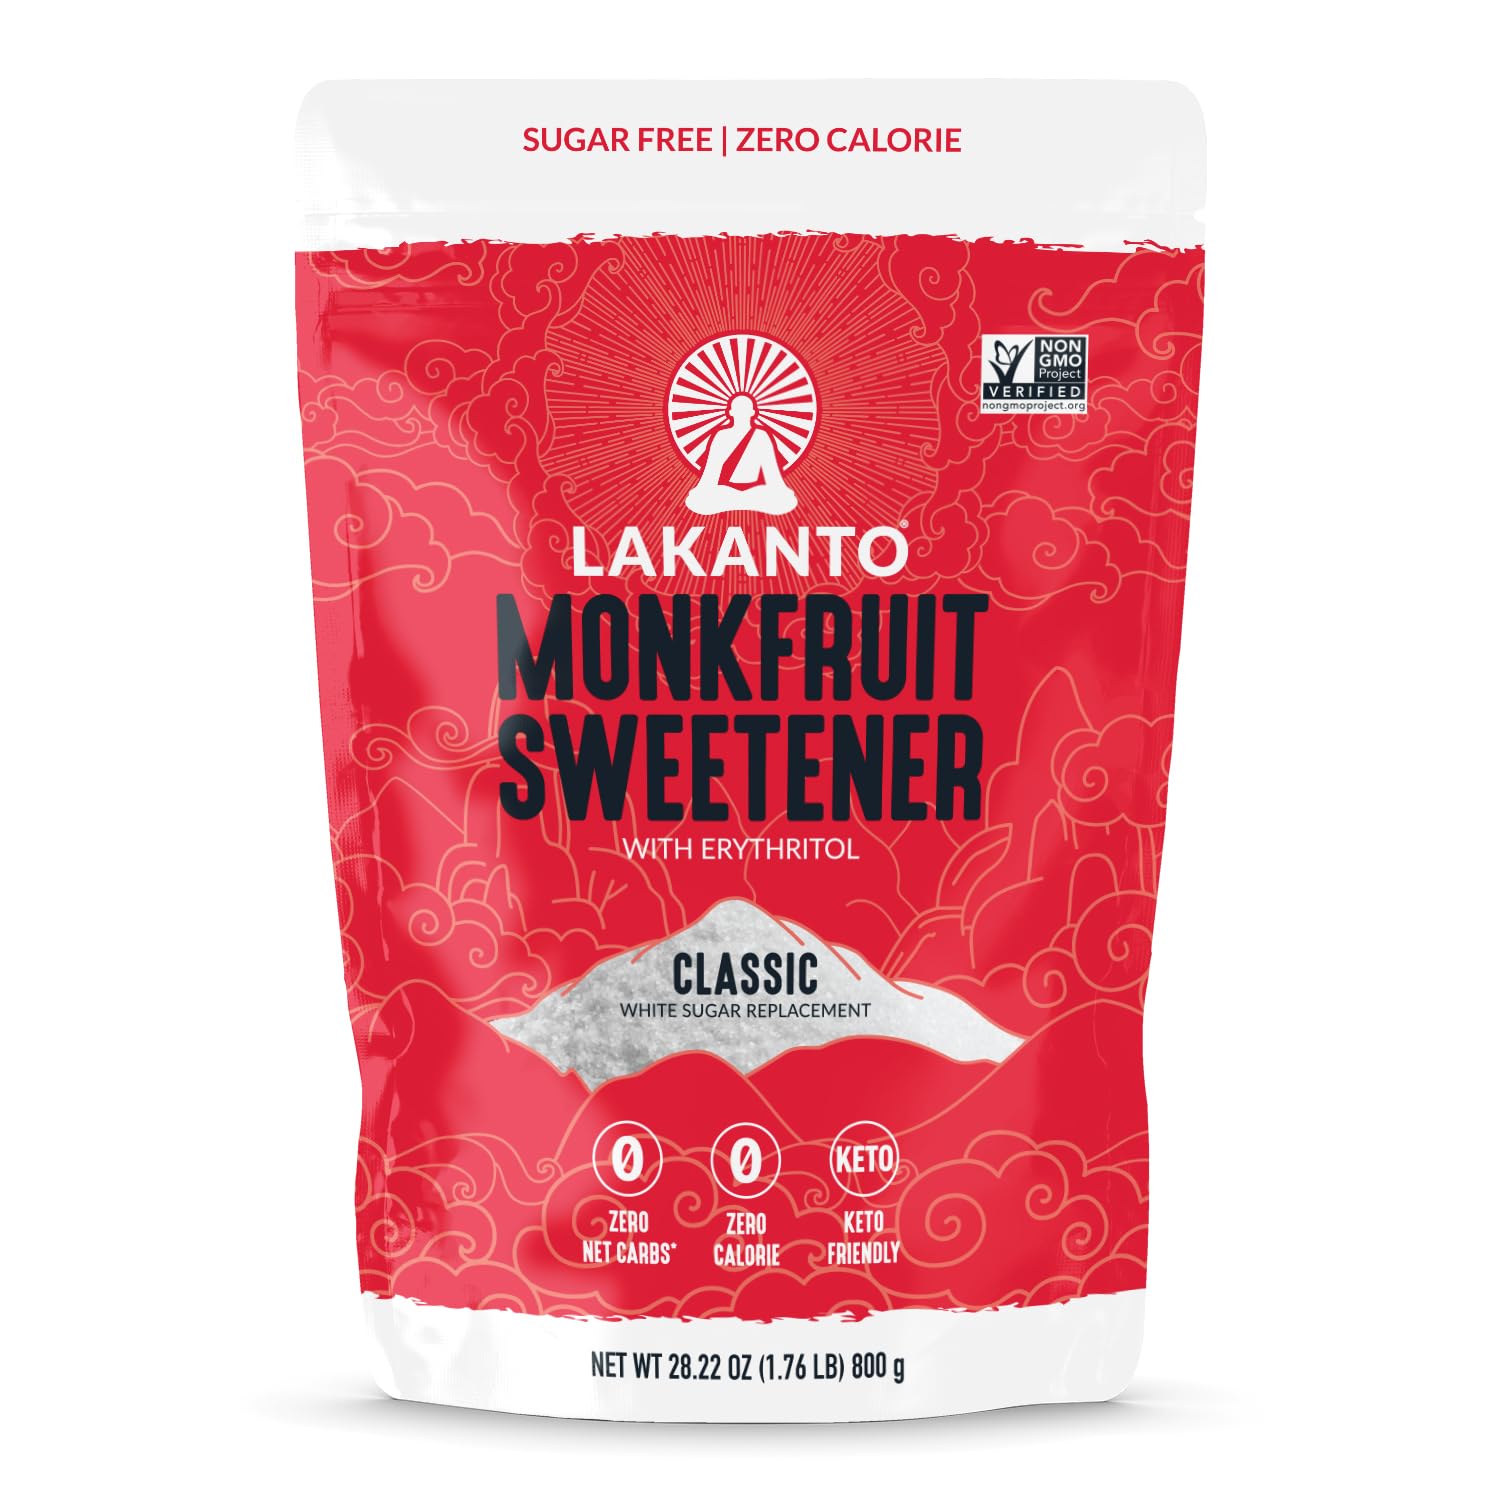 Lakanto Classic Monk Fruit Sweetener with Erythritol - White Sugar Substitute, Zero Calorie, Keto Diet Friendly, Zero Net Carbs, Baking, Extract, Sugar Replacement (Classic White - 1.76 lb)